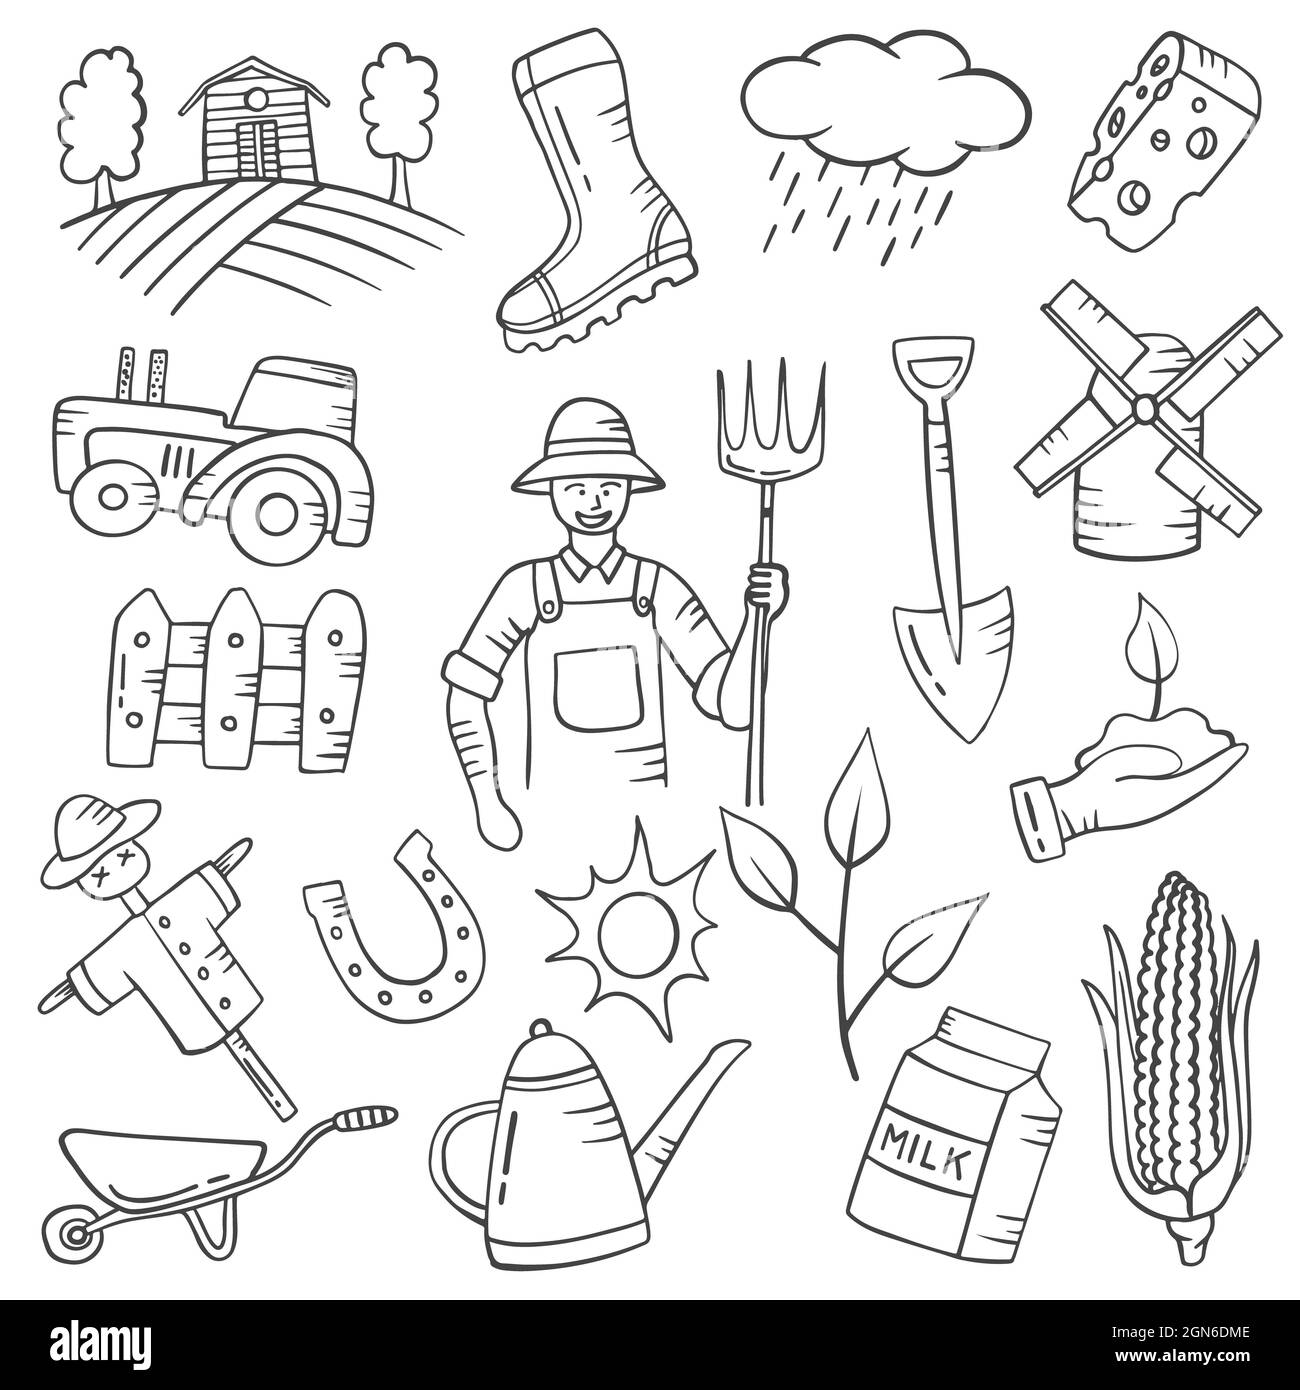 farmer jobs or profession doodle hand drawn set collections with outline black and white style vector illustration Stock Photo